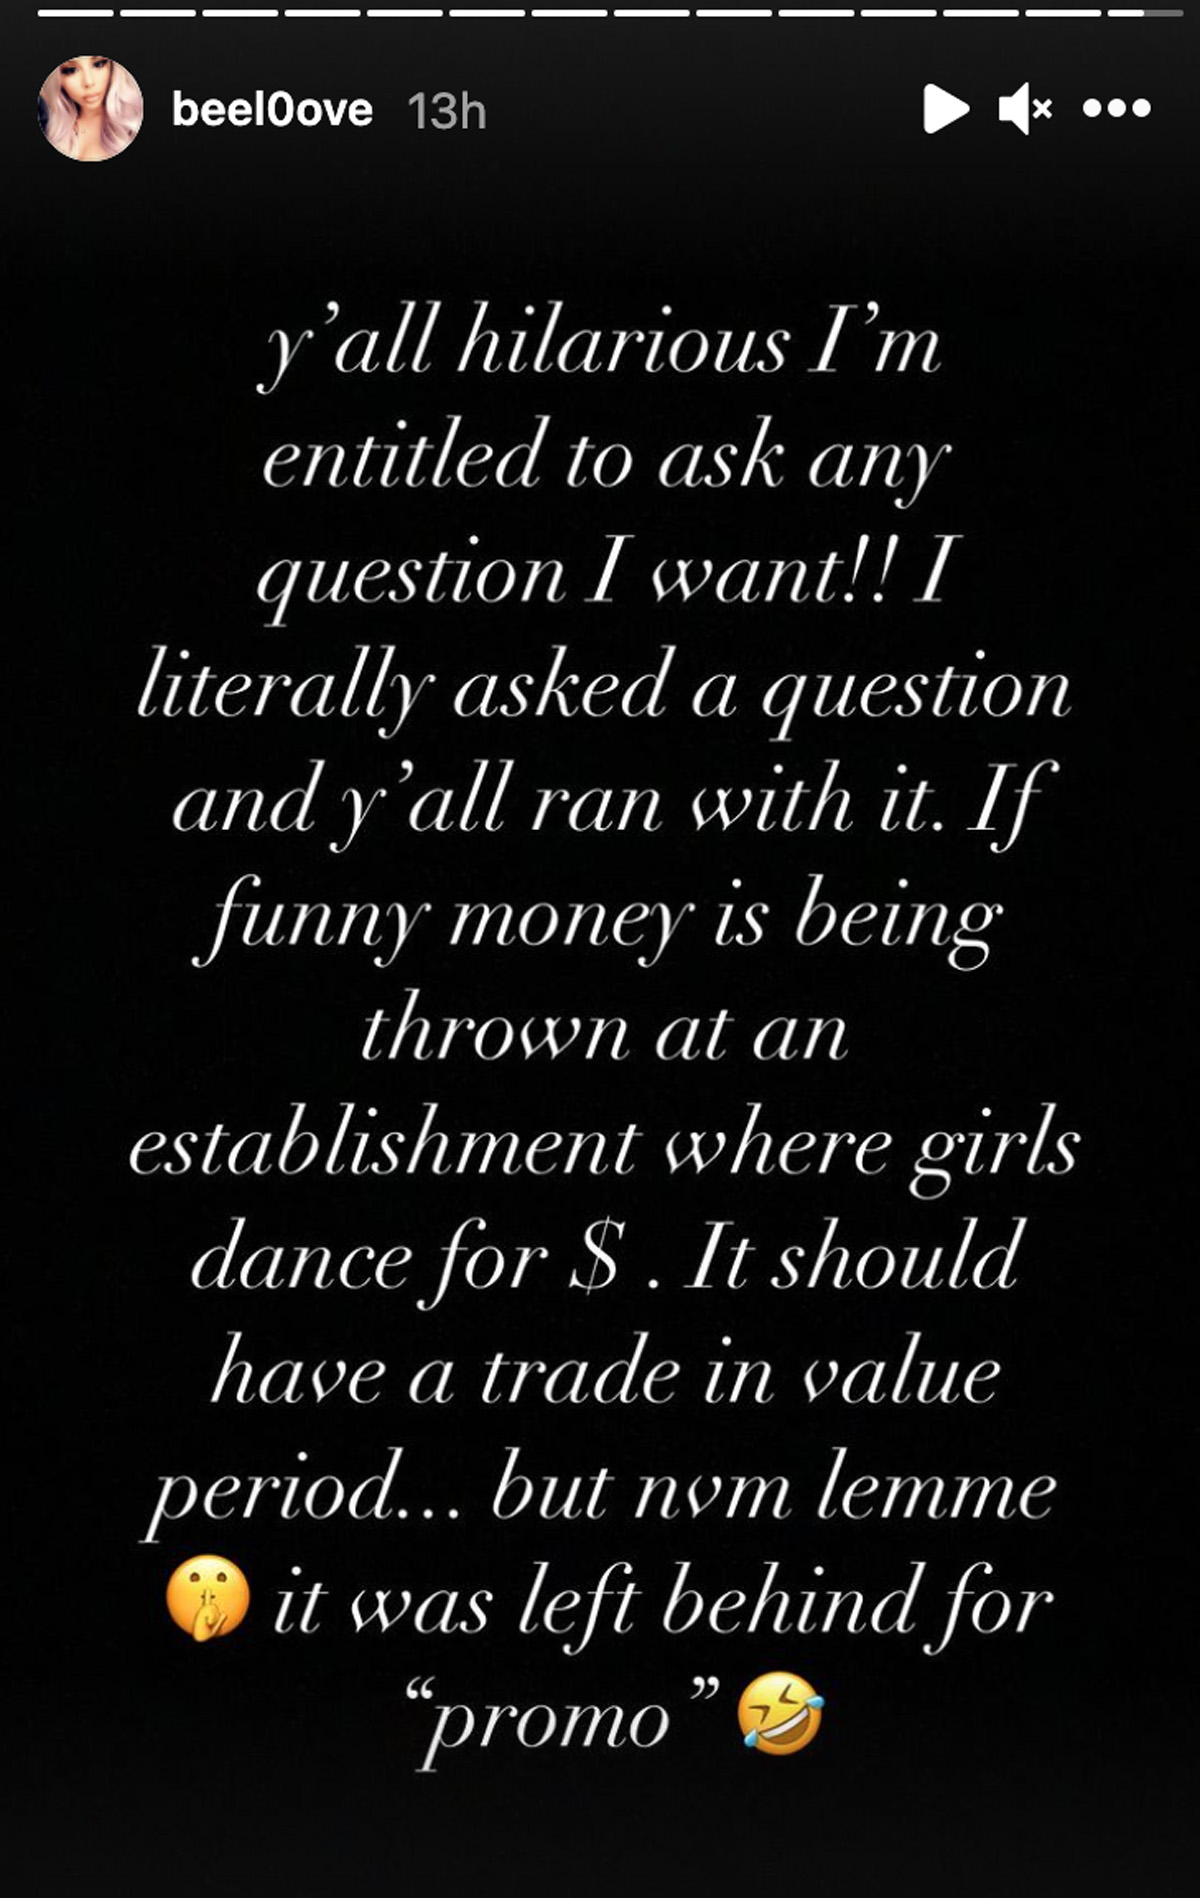 Exotic dancer responds to claim about promo Usher money